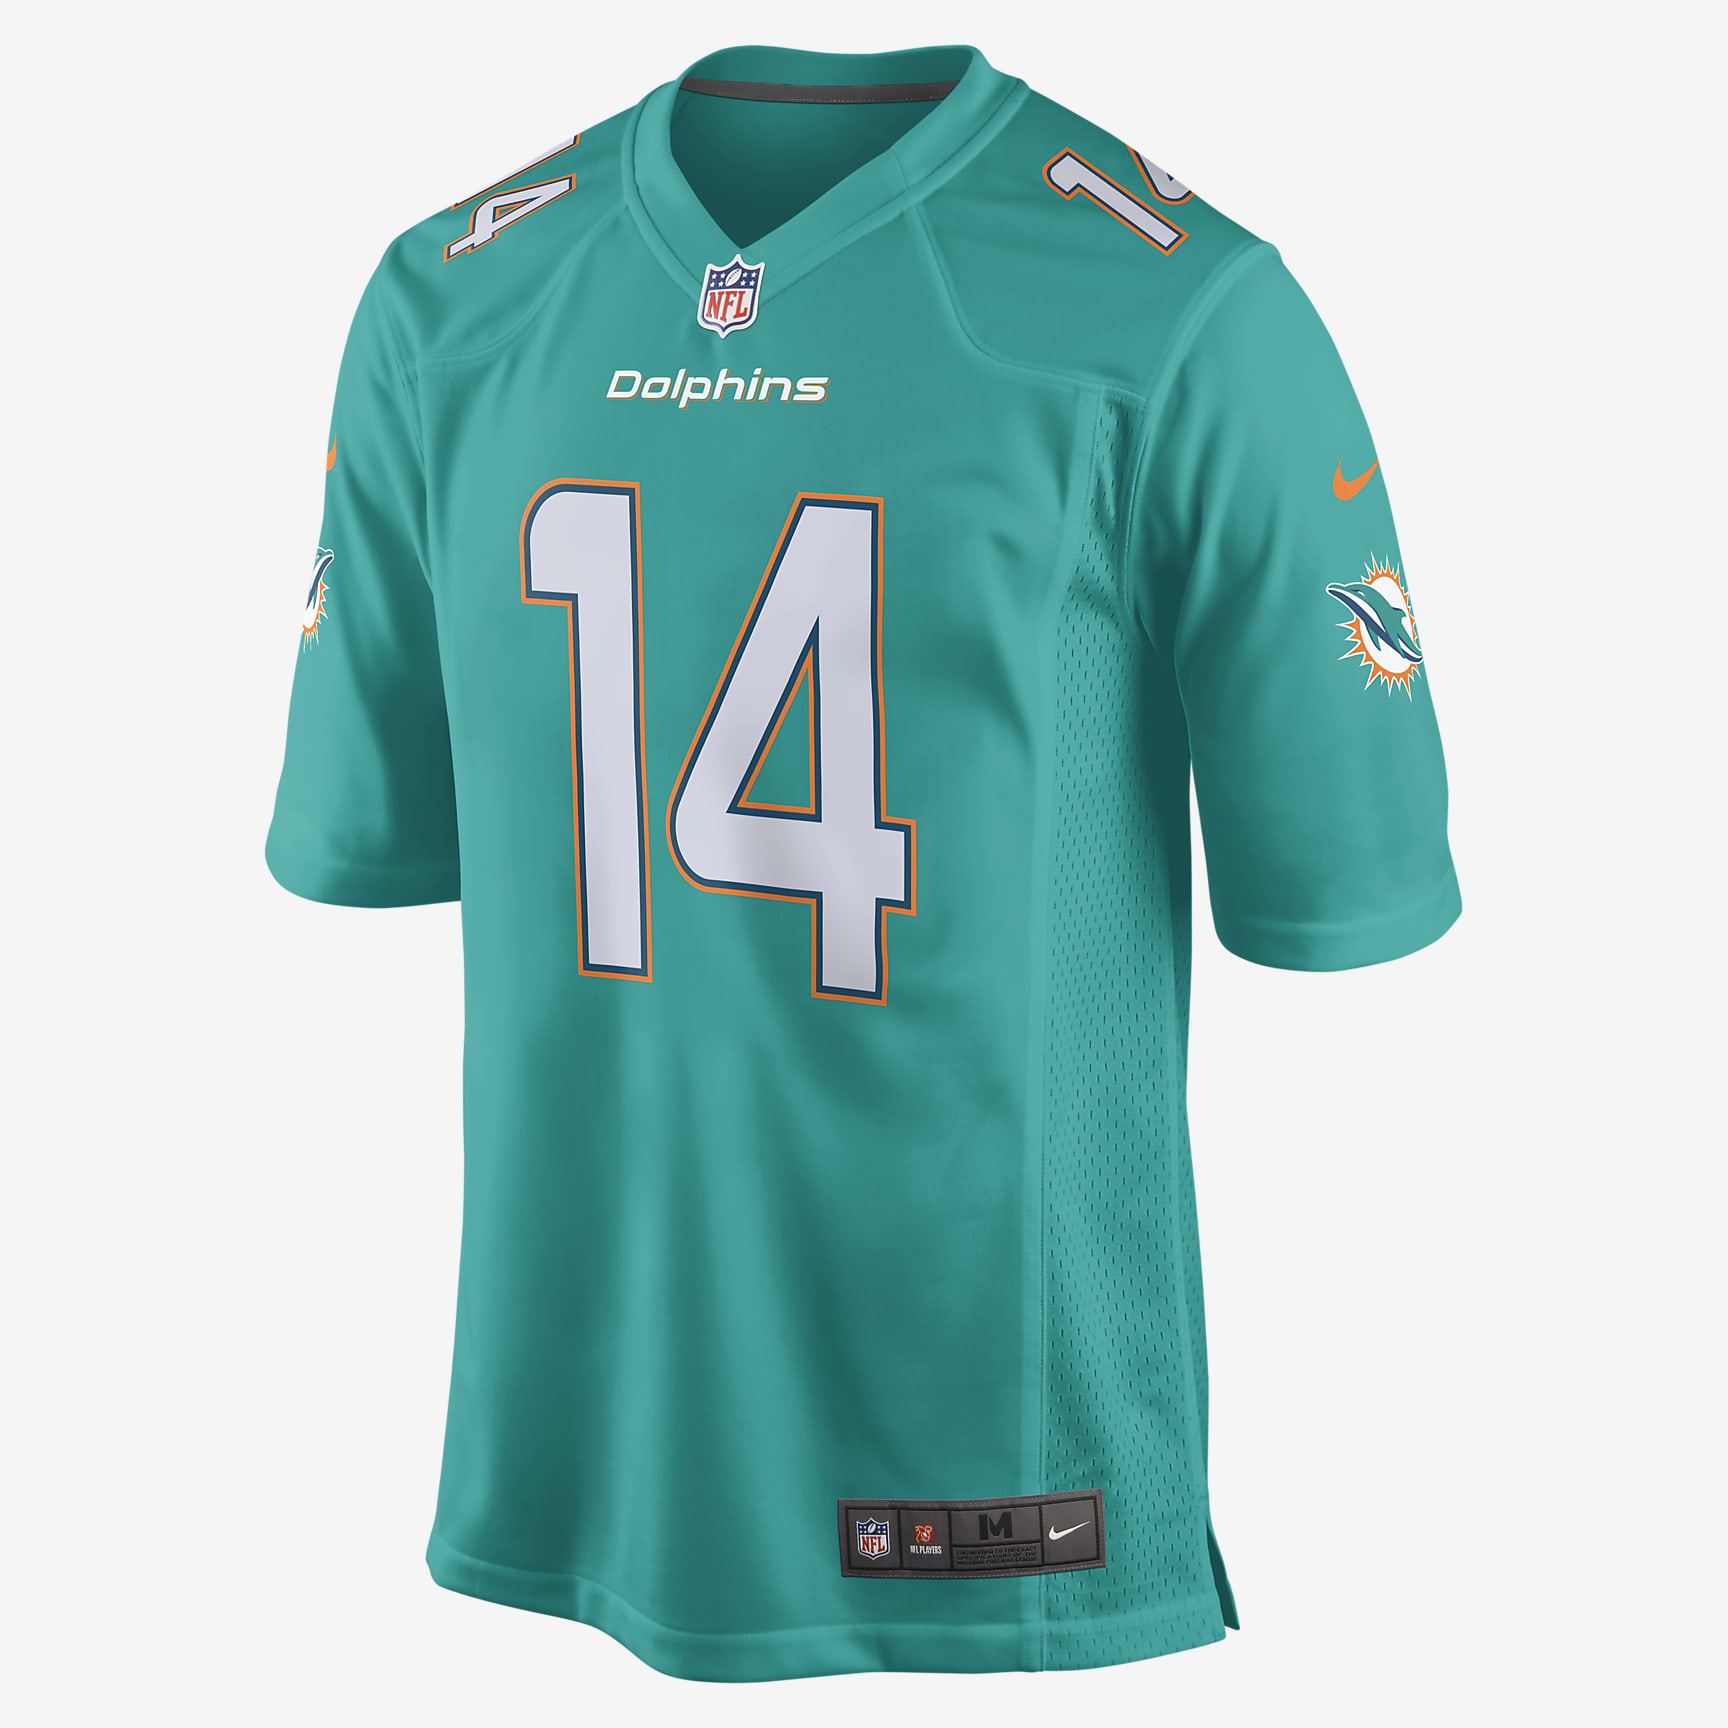 NFL Miami Dolphins (Jarvis Landry) Men's American Football Home Game Jersey. Nike RO